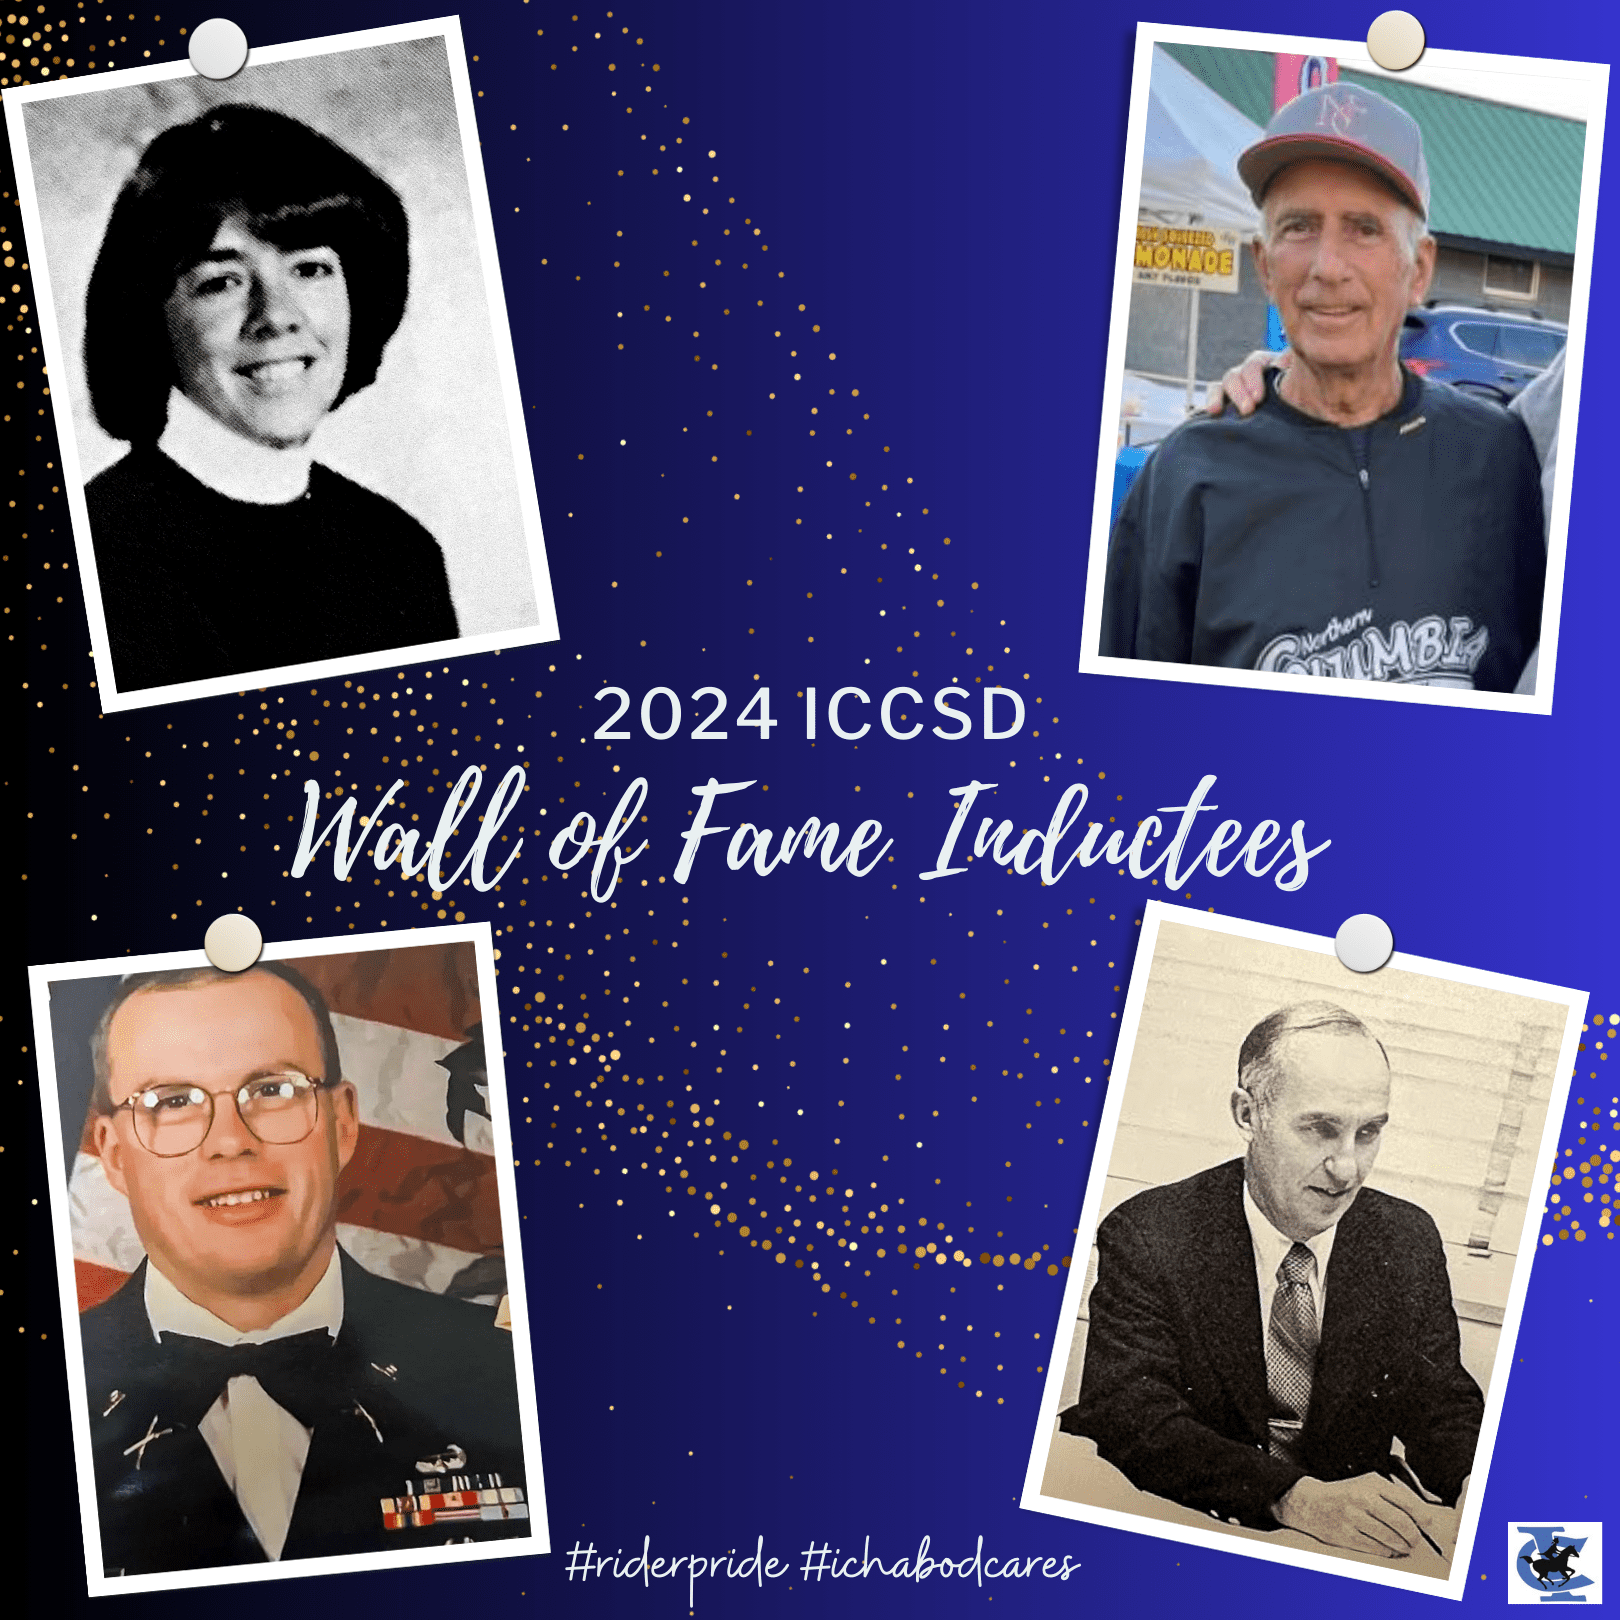 This is a graphic including pictures of the new Wall of Fame Inductees: Geraldine Garafalo, Lee Norton, Brian Simmons and E. Gordon Van Buren.